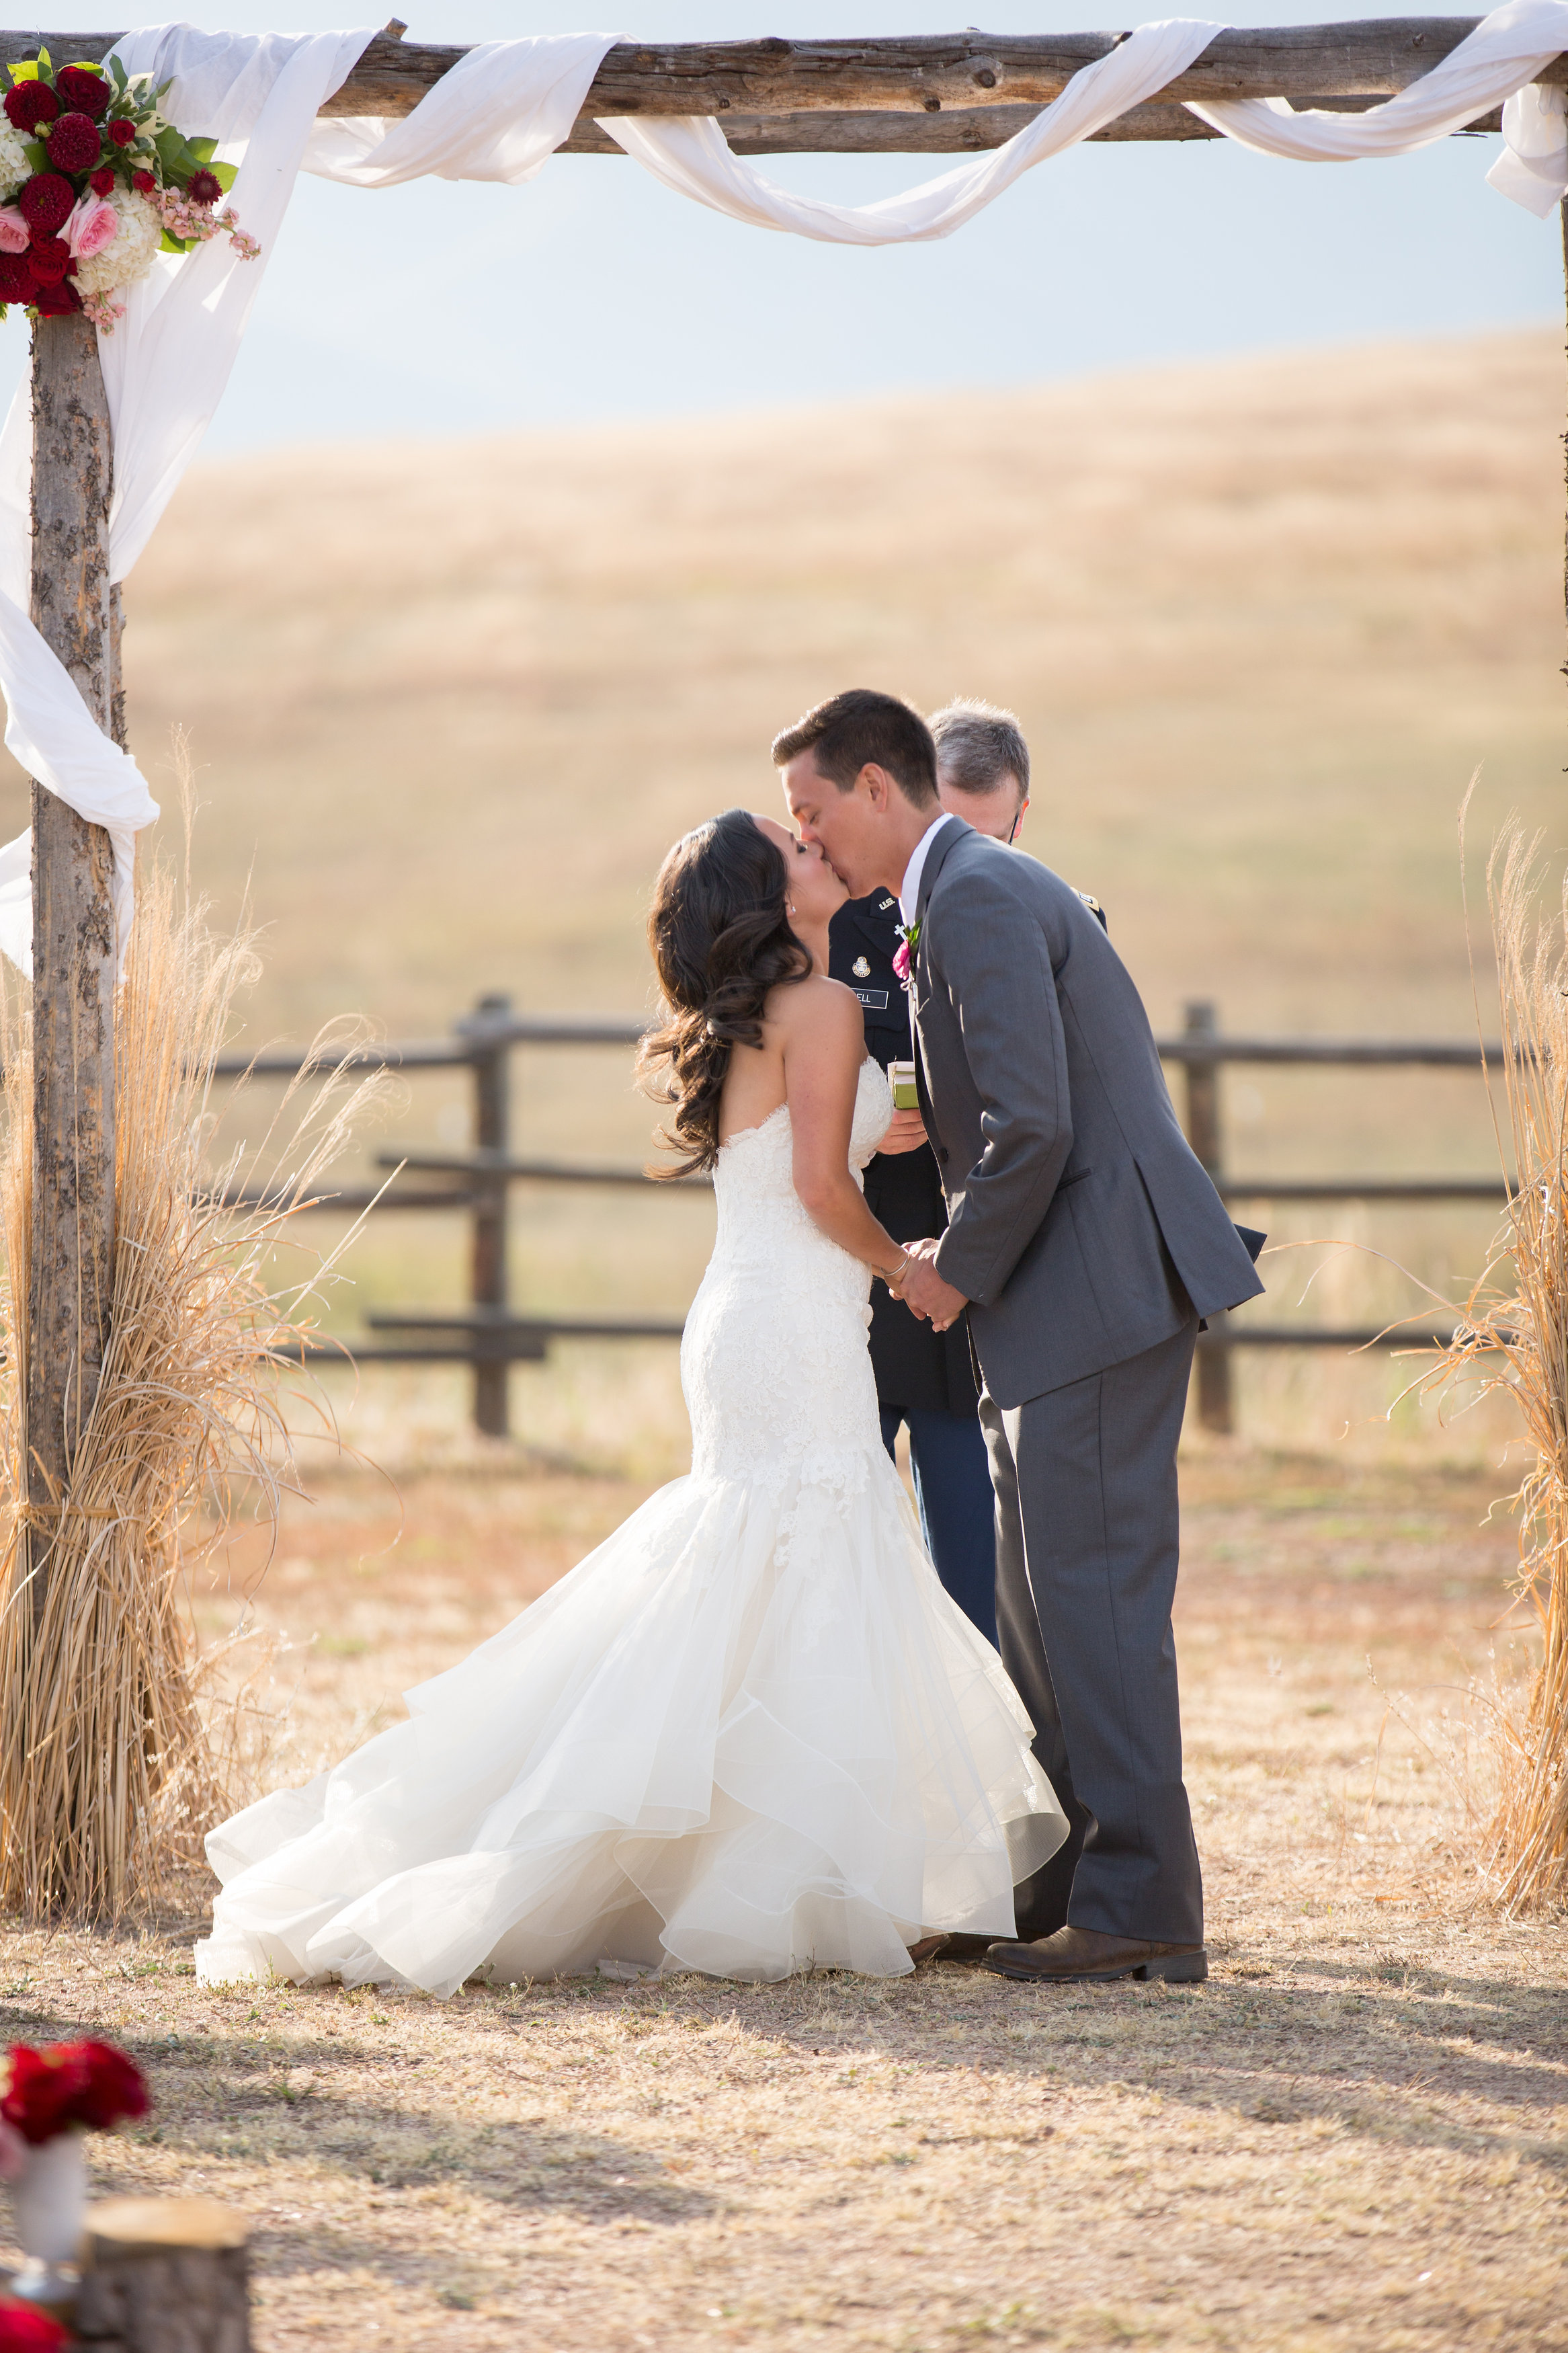  Wiens Ranch Wedding Colorado | Liancarlo 6803 Wedding Gown from Little White Dress | Jamie Beth Photography 